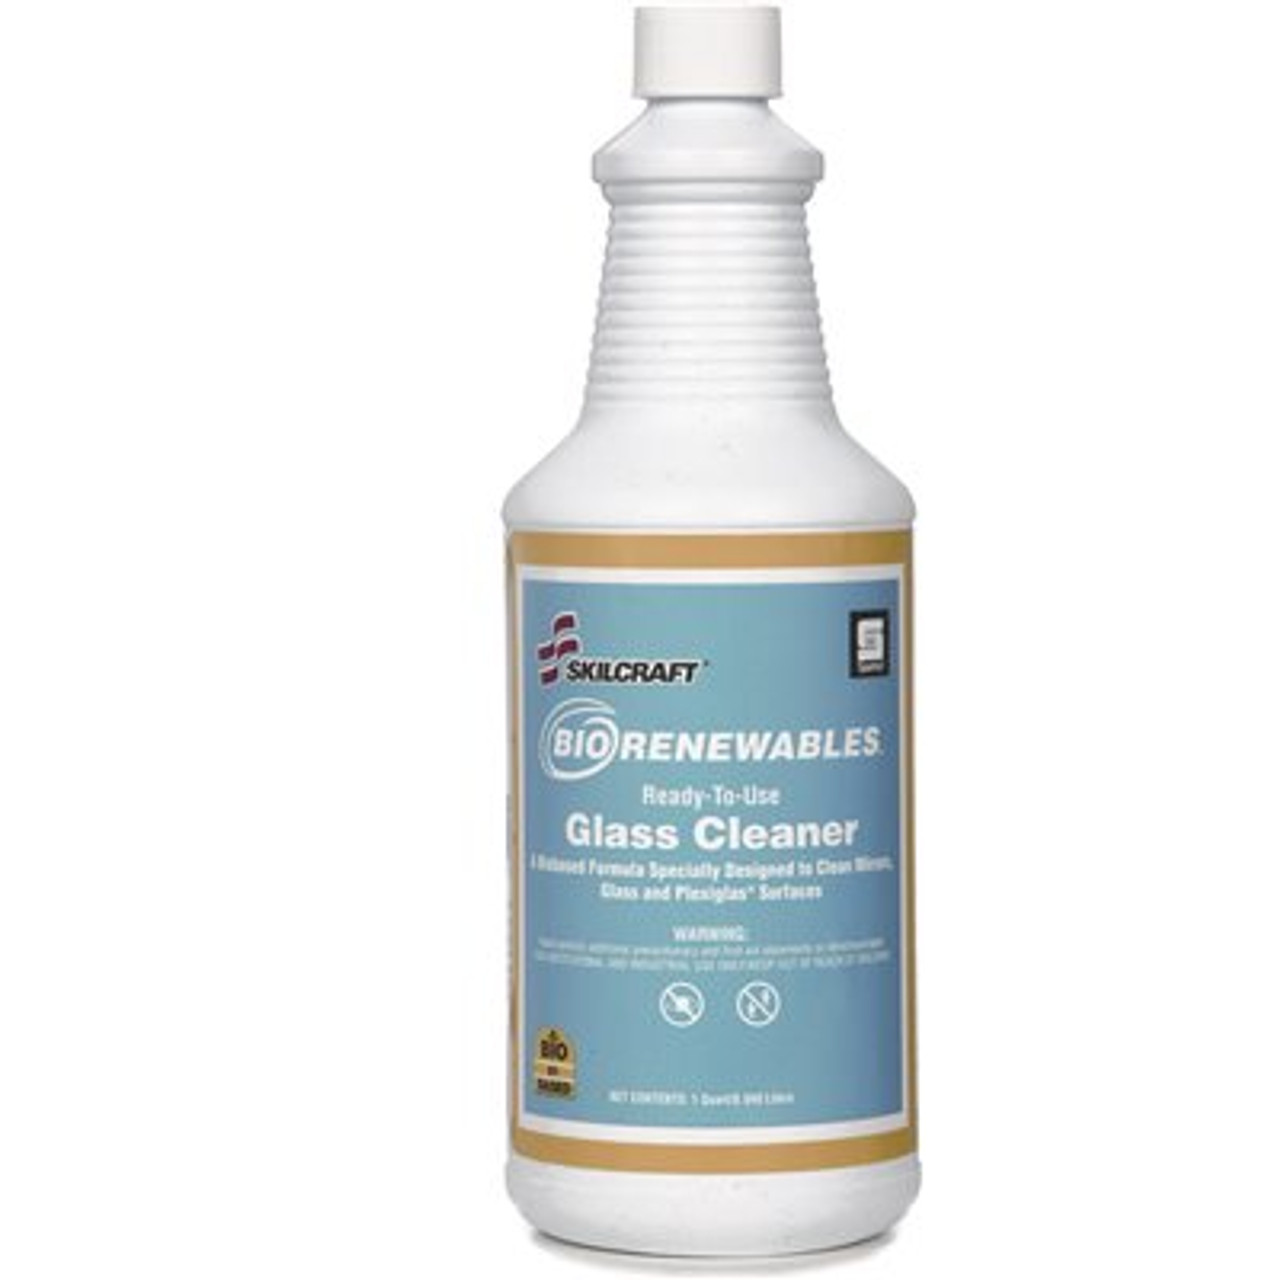 Ready To Use Glass Cleaner With Trigger Sprayer, 32 Oz, Case Of 12